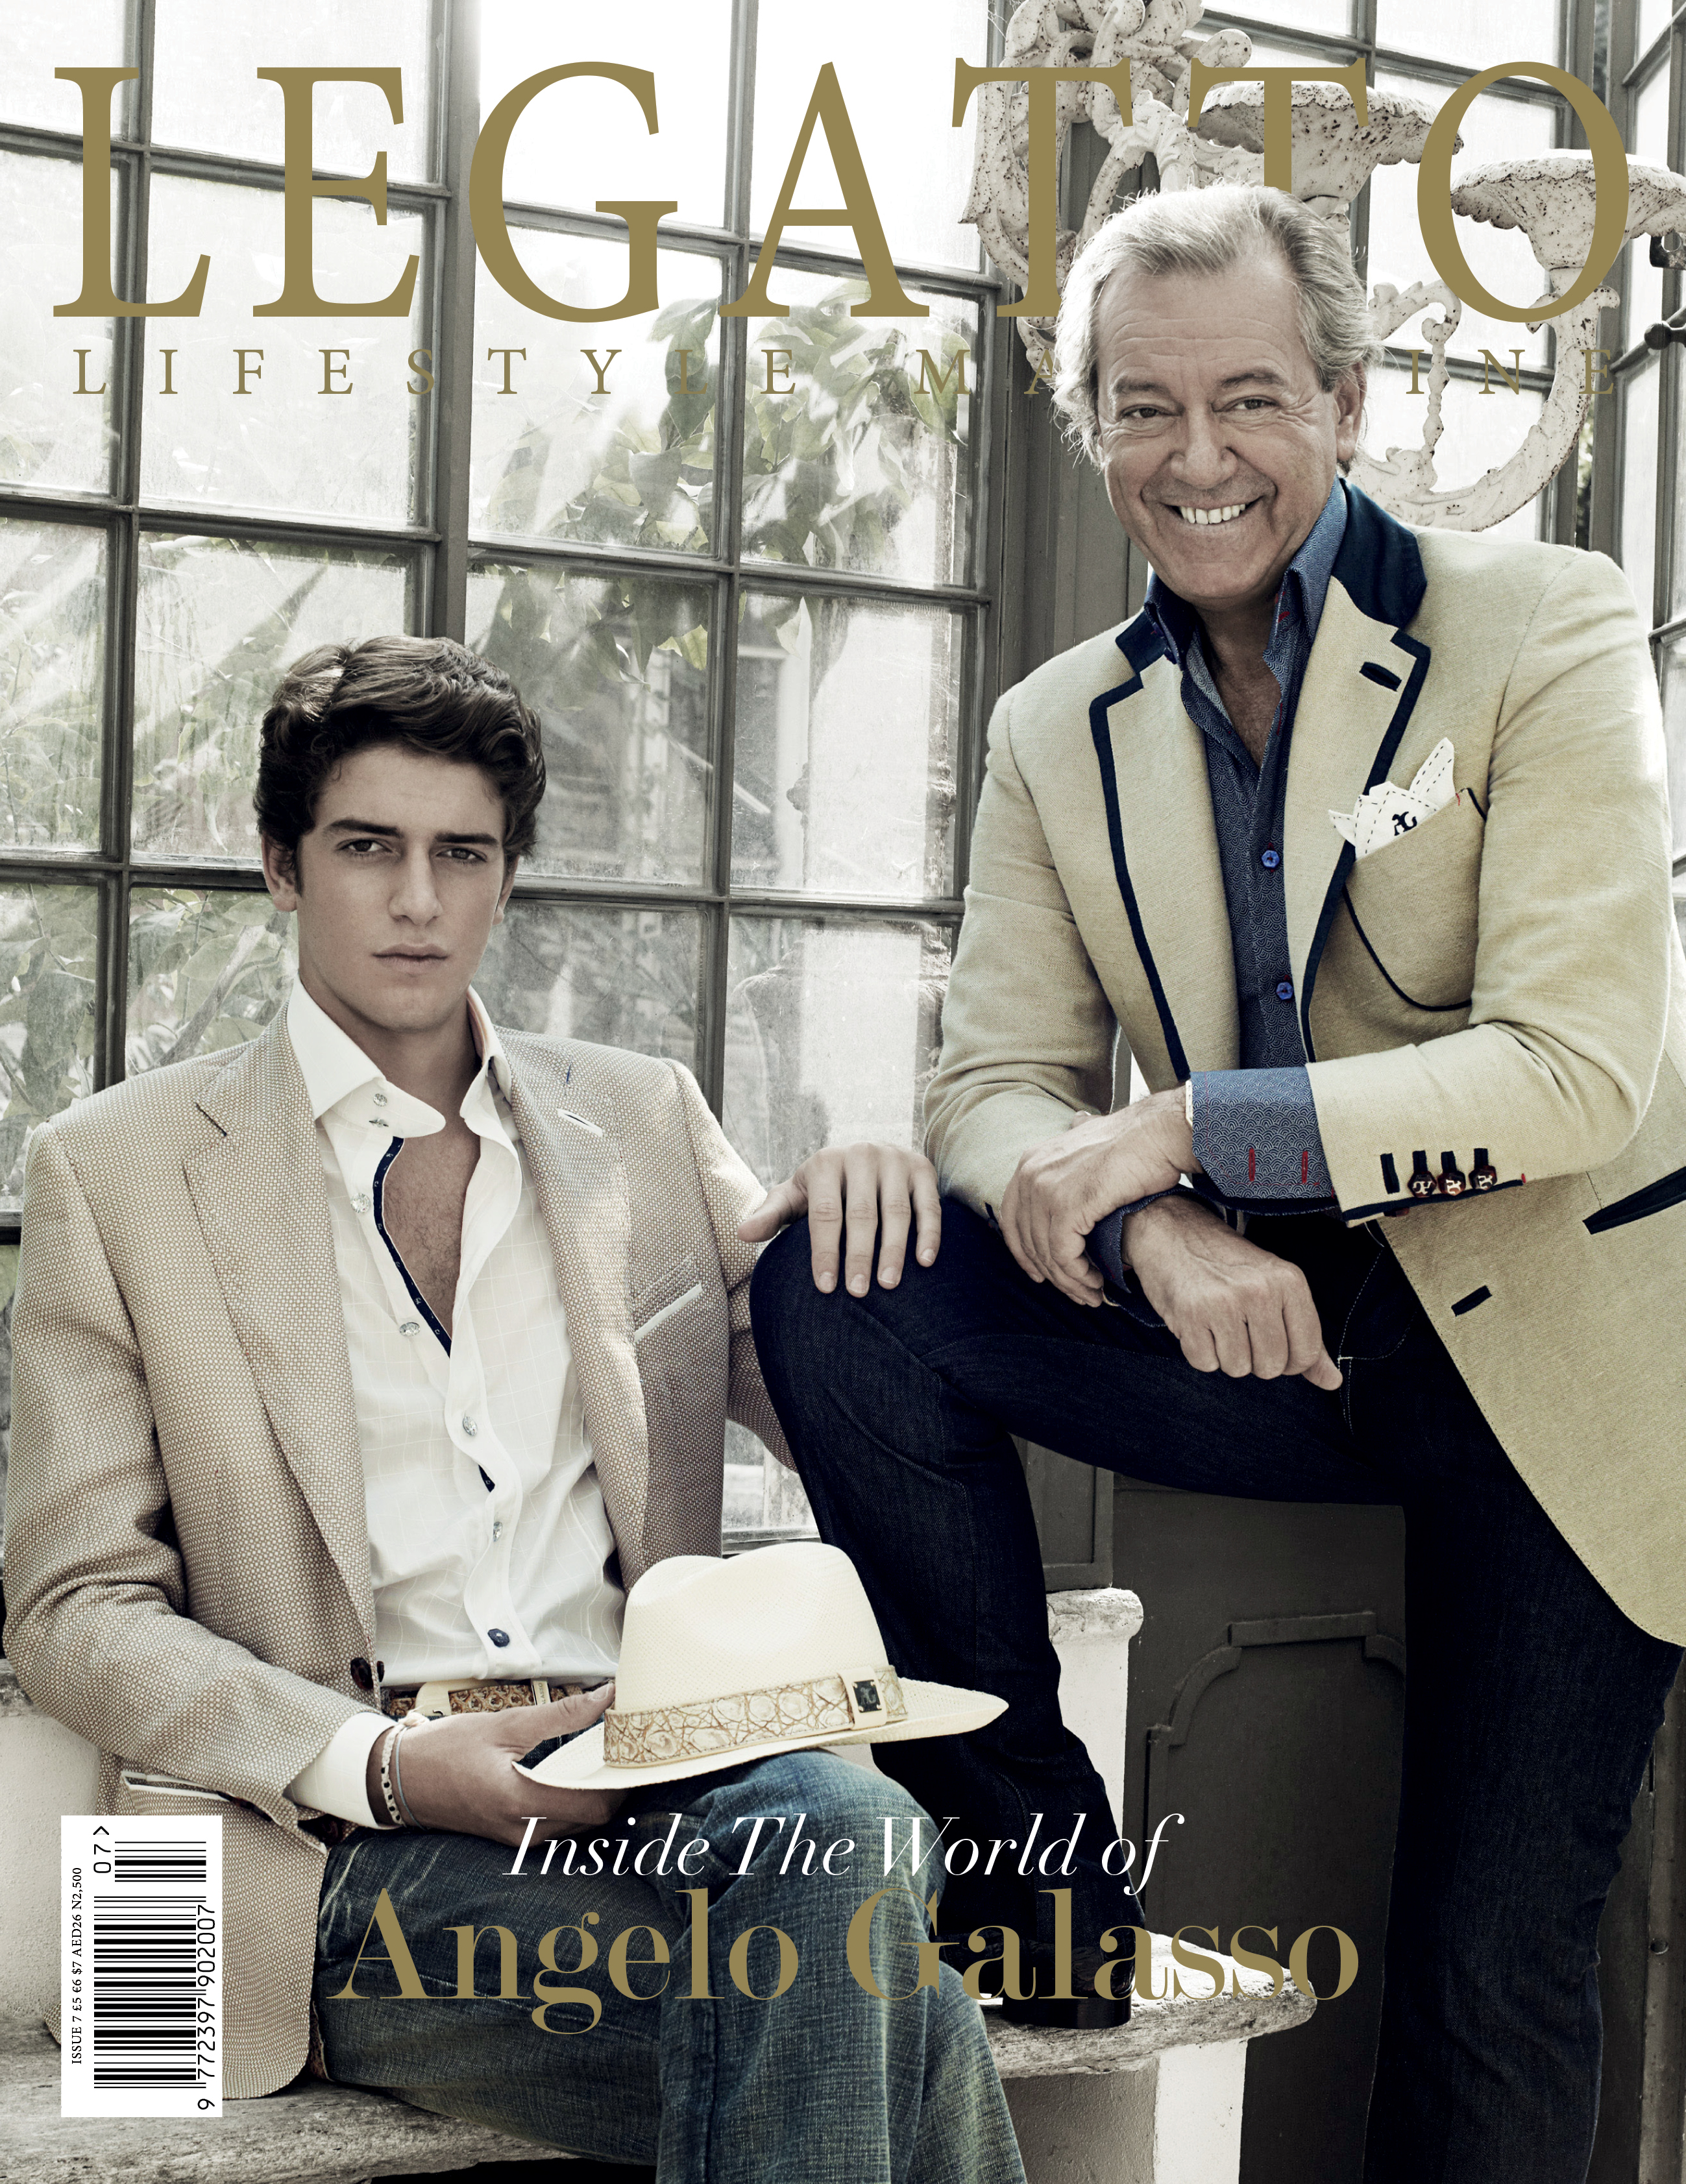 Legatto Lifestyle: Issue 7 (April 2016) - Cover (Angelo Galasso)